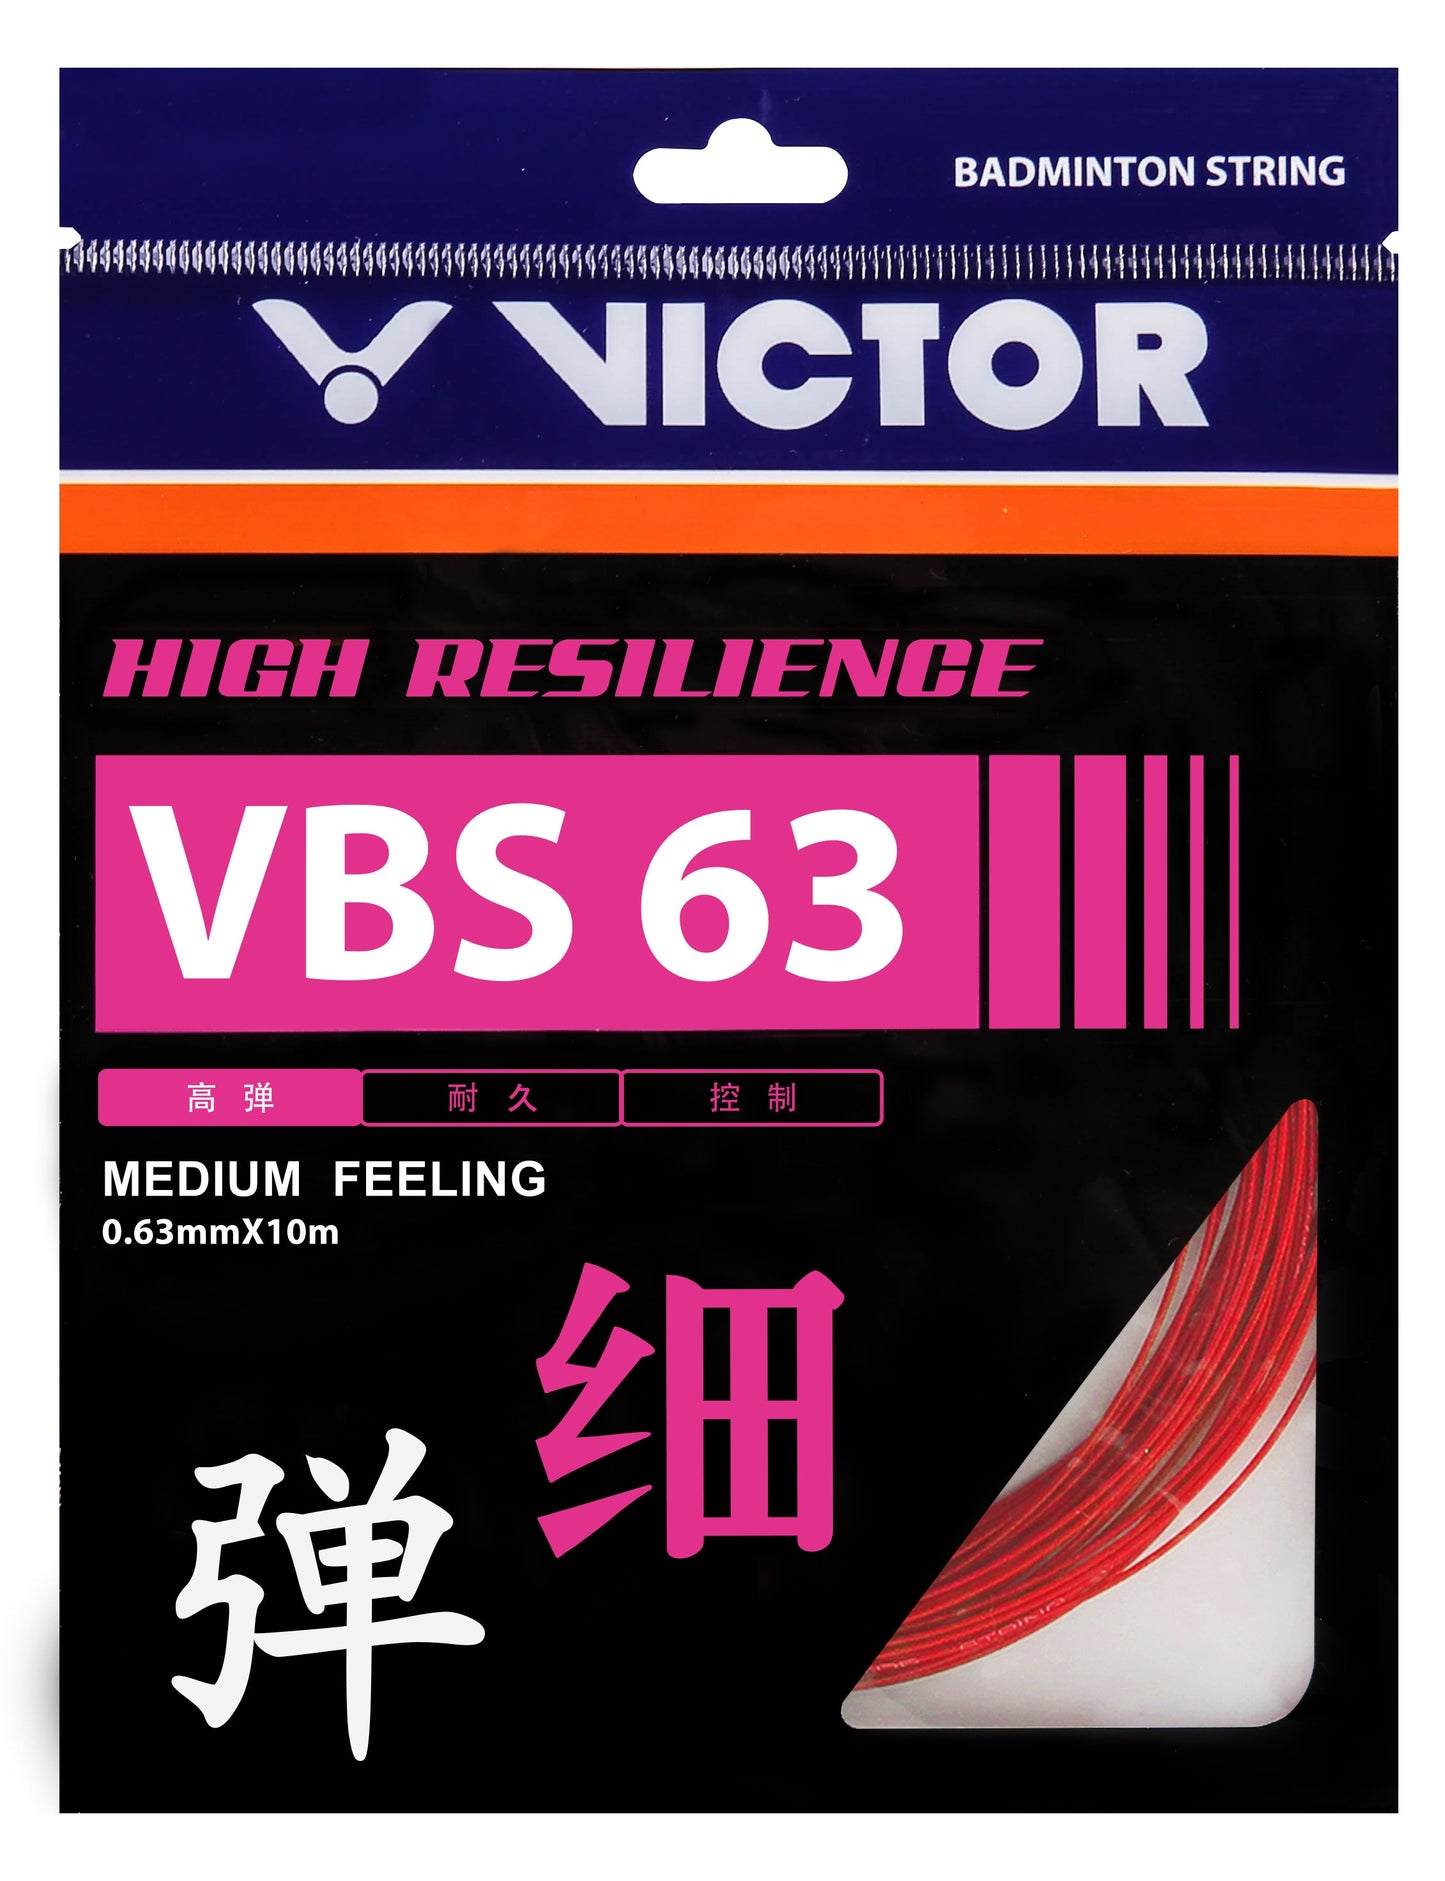 VBS-63 STRING (w/ Stringing Service Only)